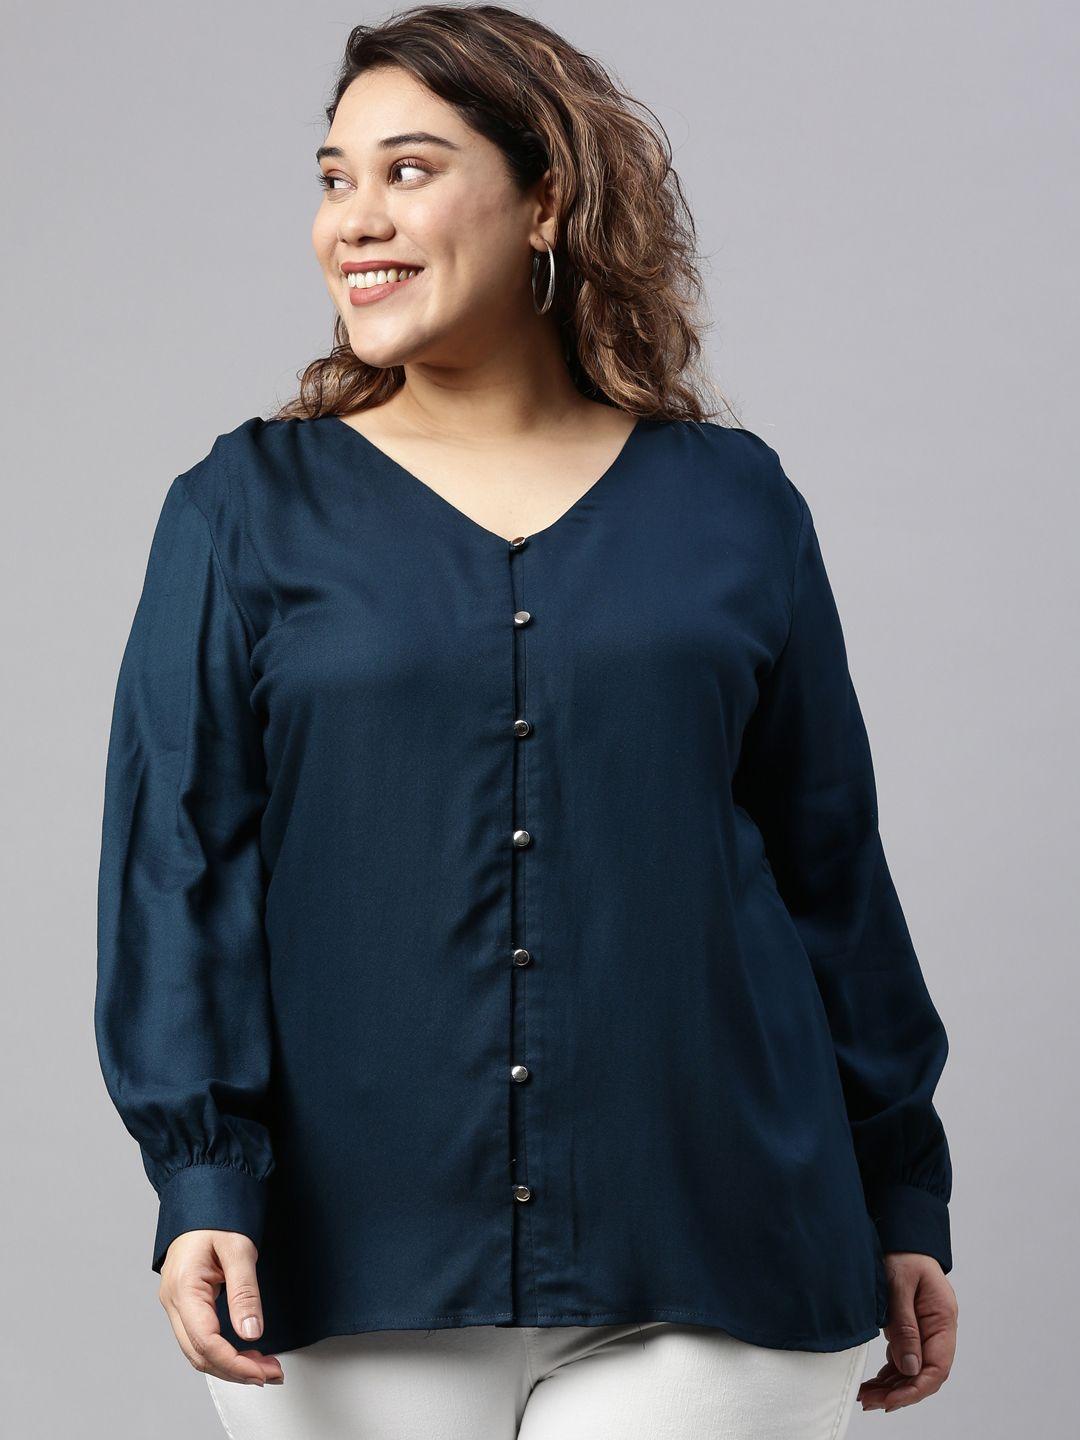 the pink moon teal crepe shirt style top